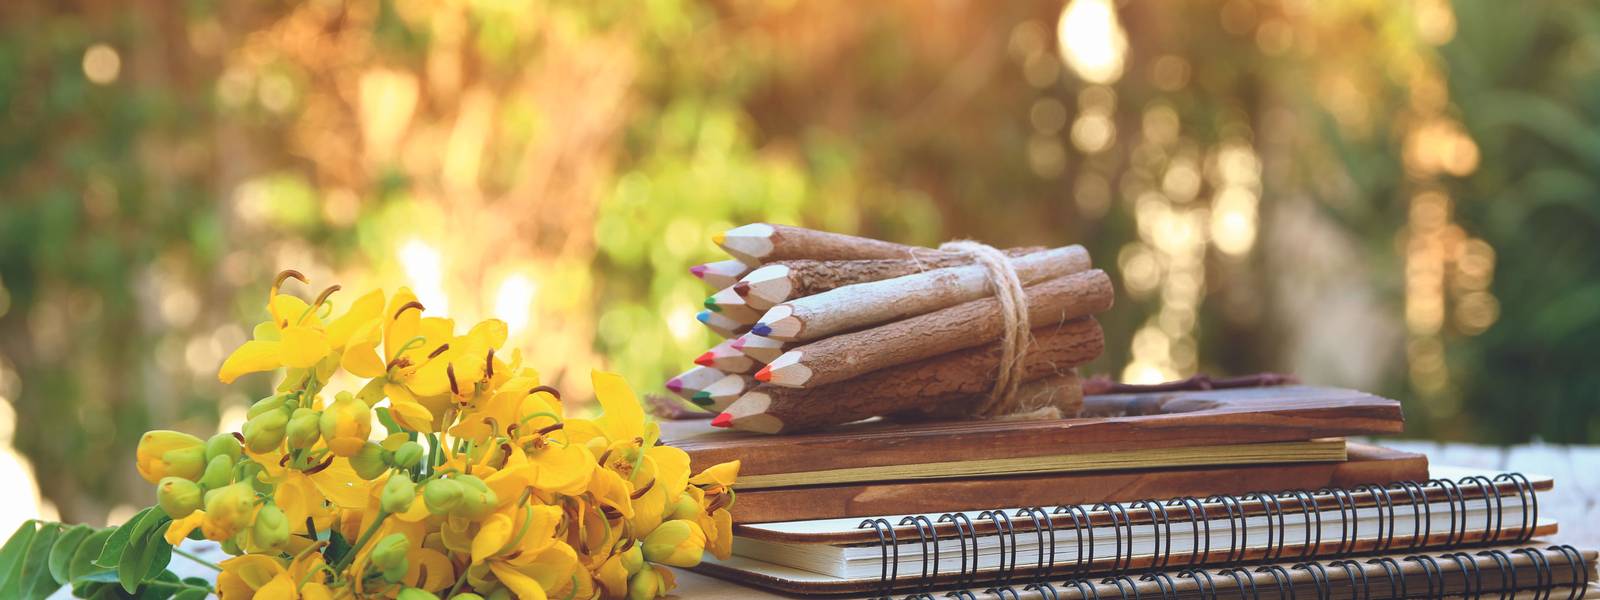 Image of notebooks, colorful pencils on wooden table outdoors at afternoon. selective focus